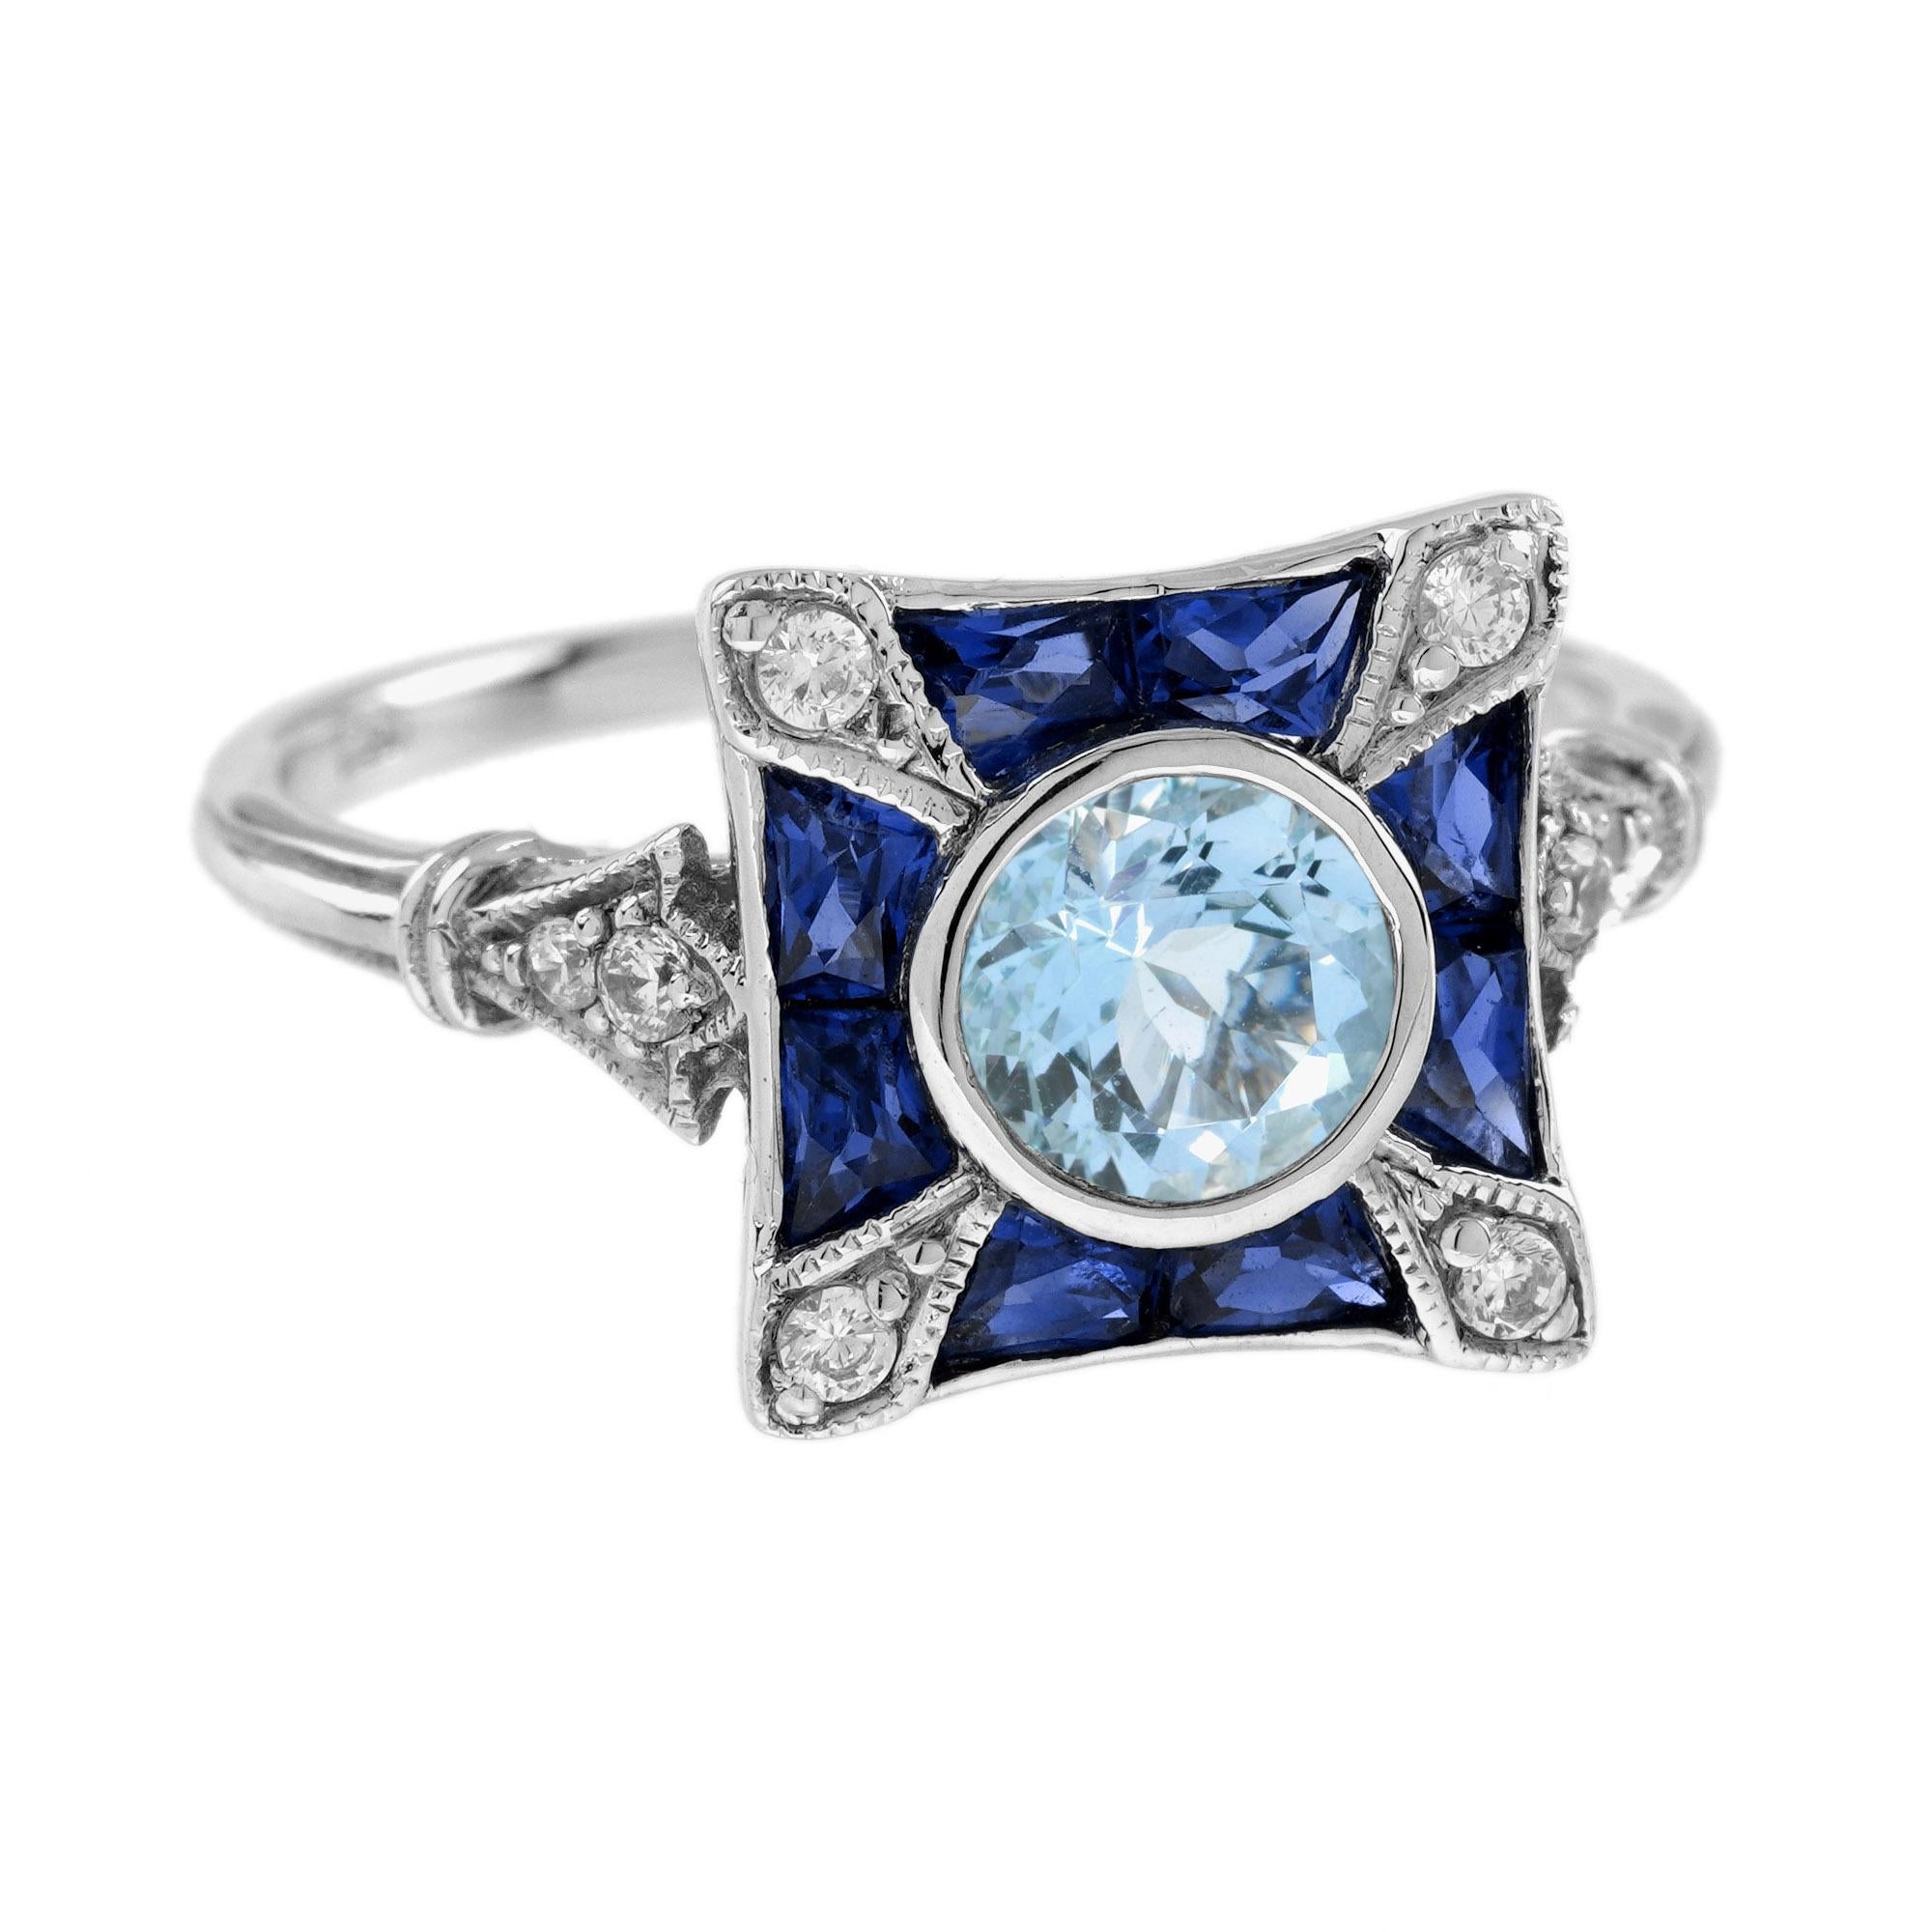 For Sale:  Aquamarine Diamond and Blue Sapphire Art Deco Style Engagement Ring in 18K Gold 3